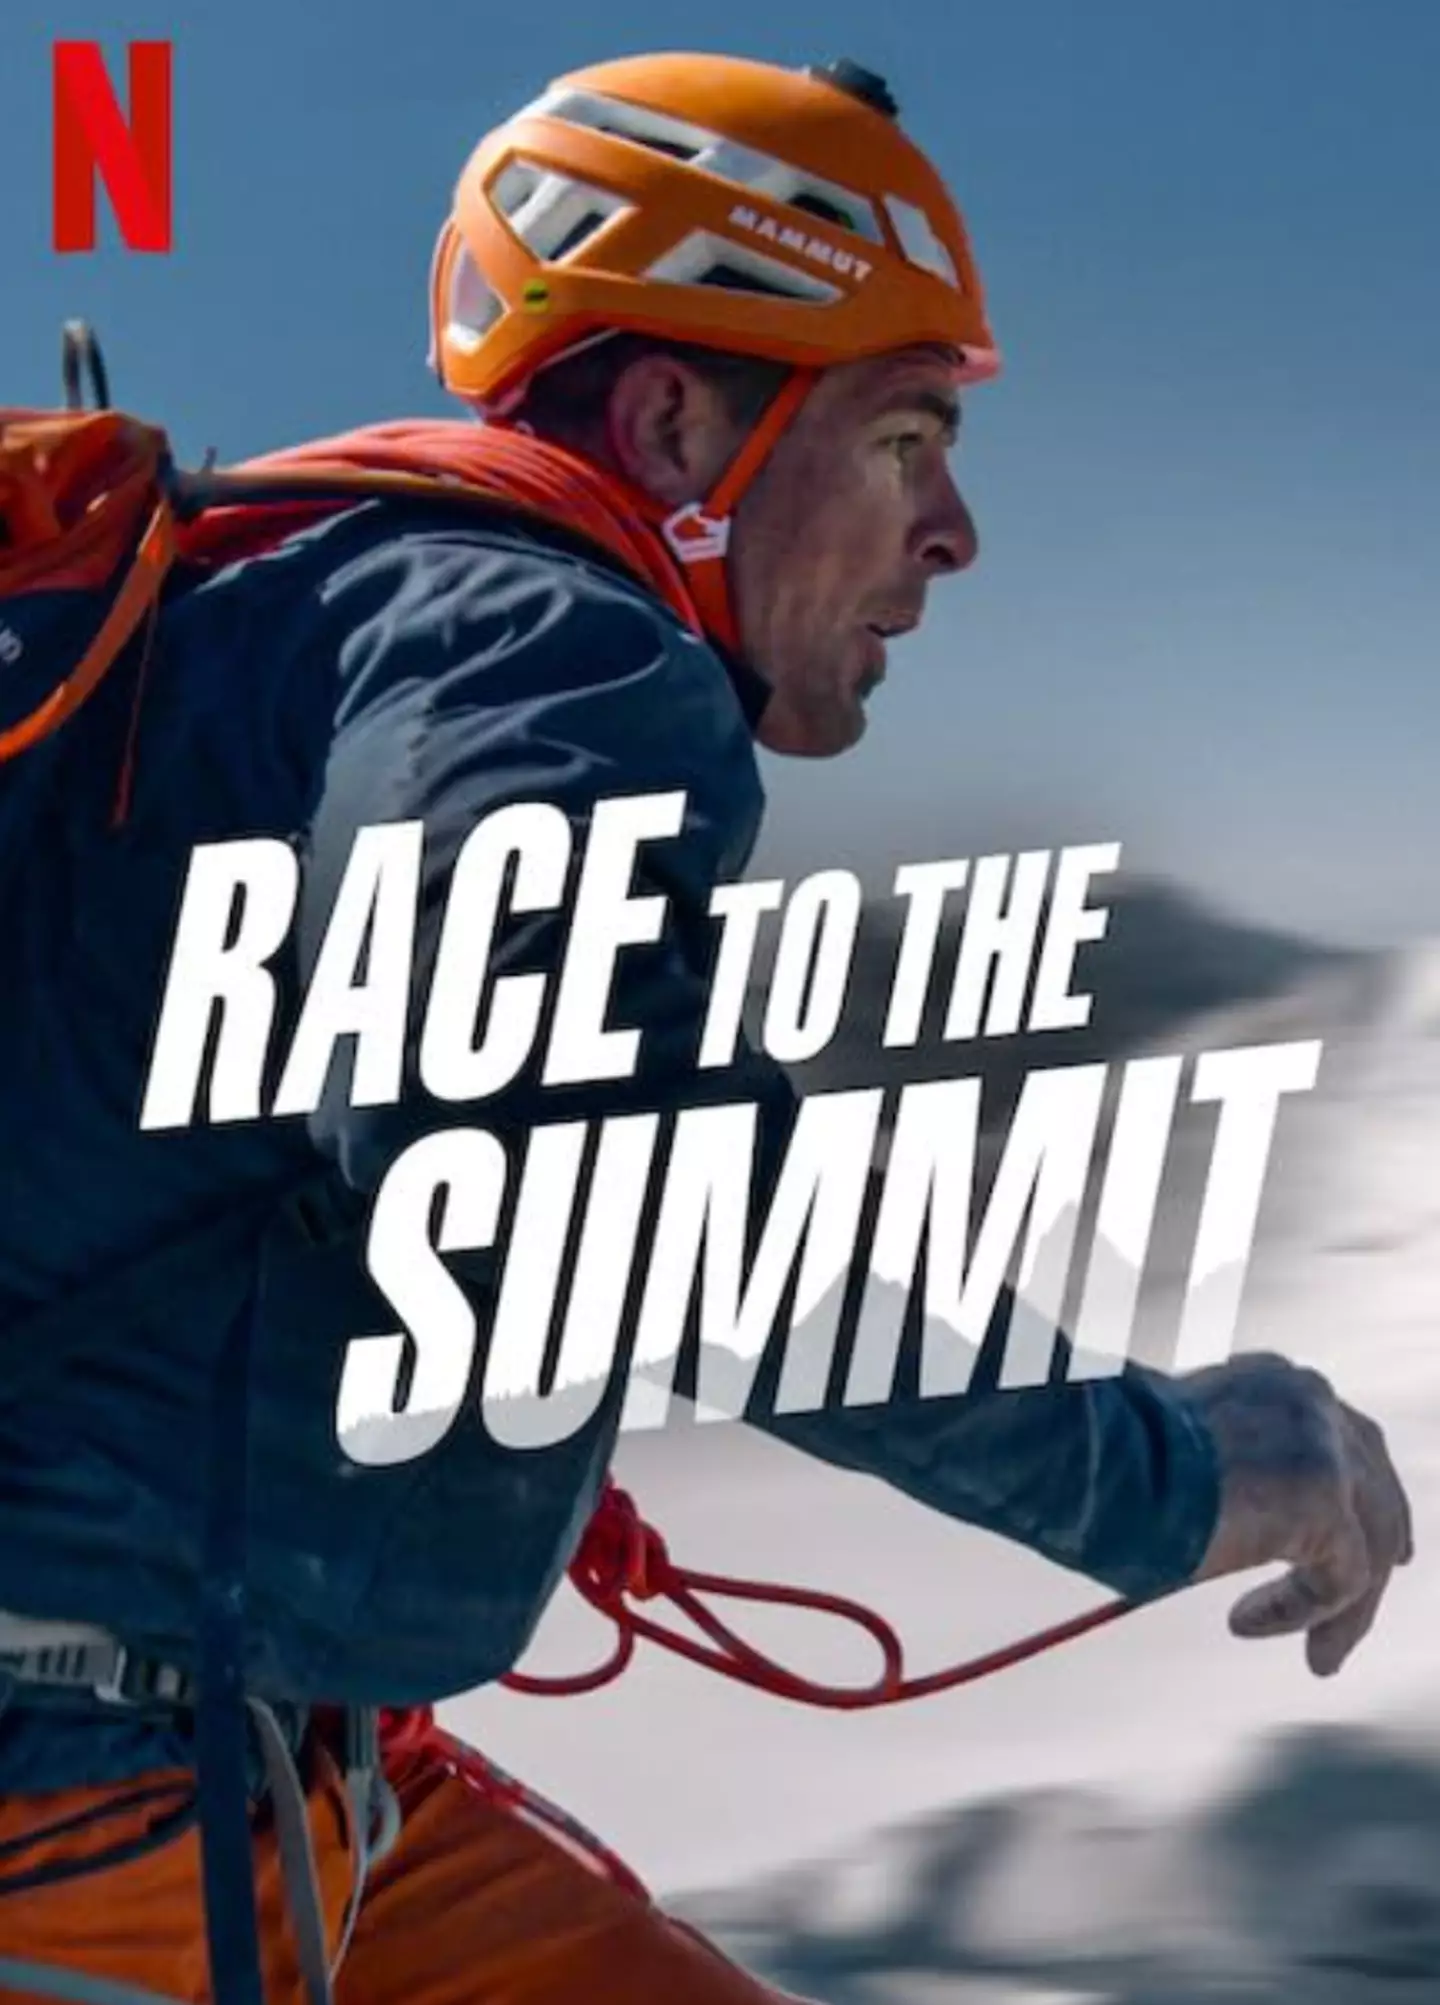 Race to the Summit documentary showcases the abilities of alpine climbers.